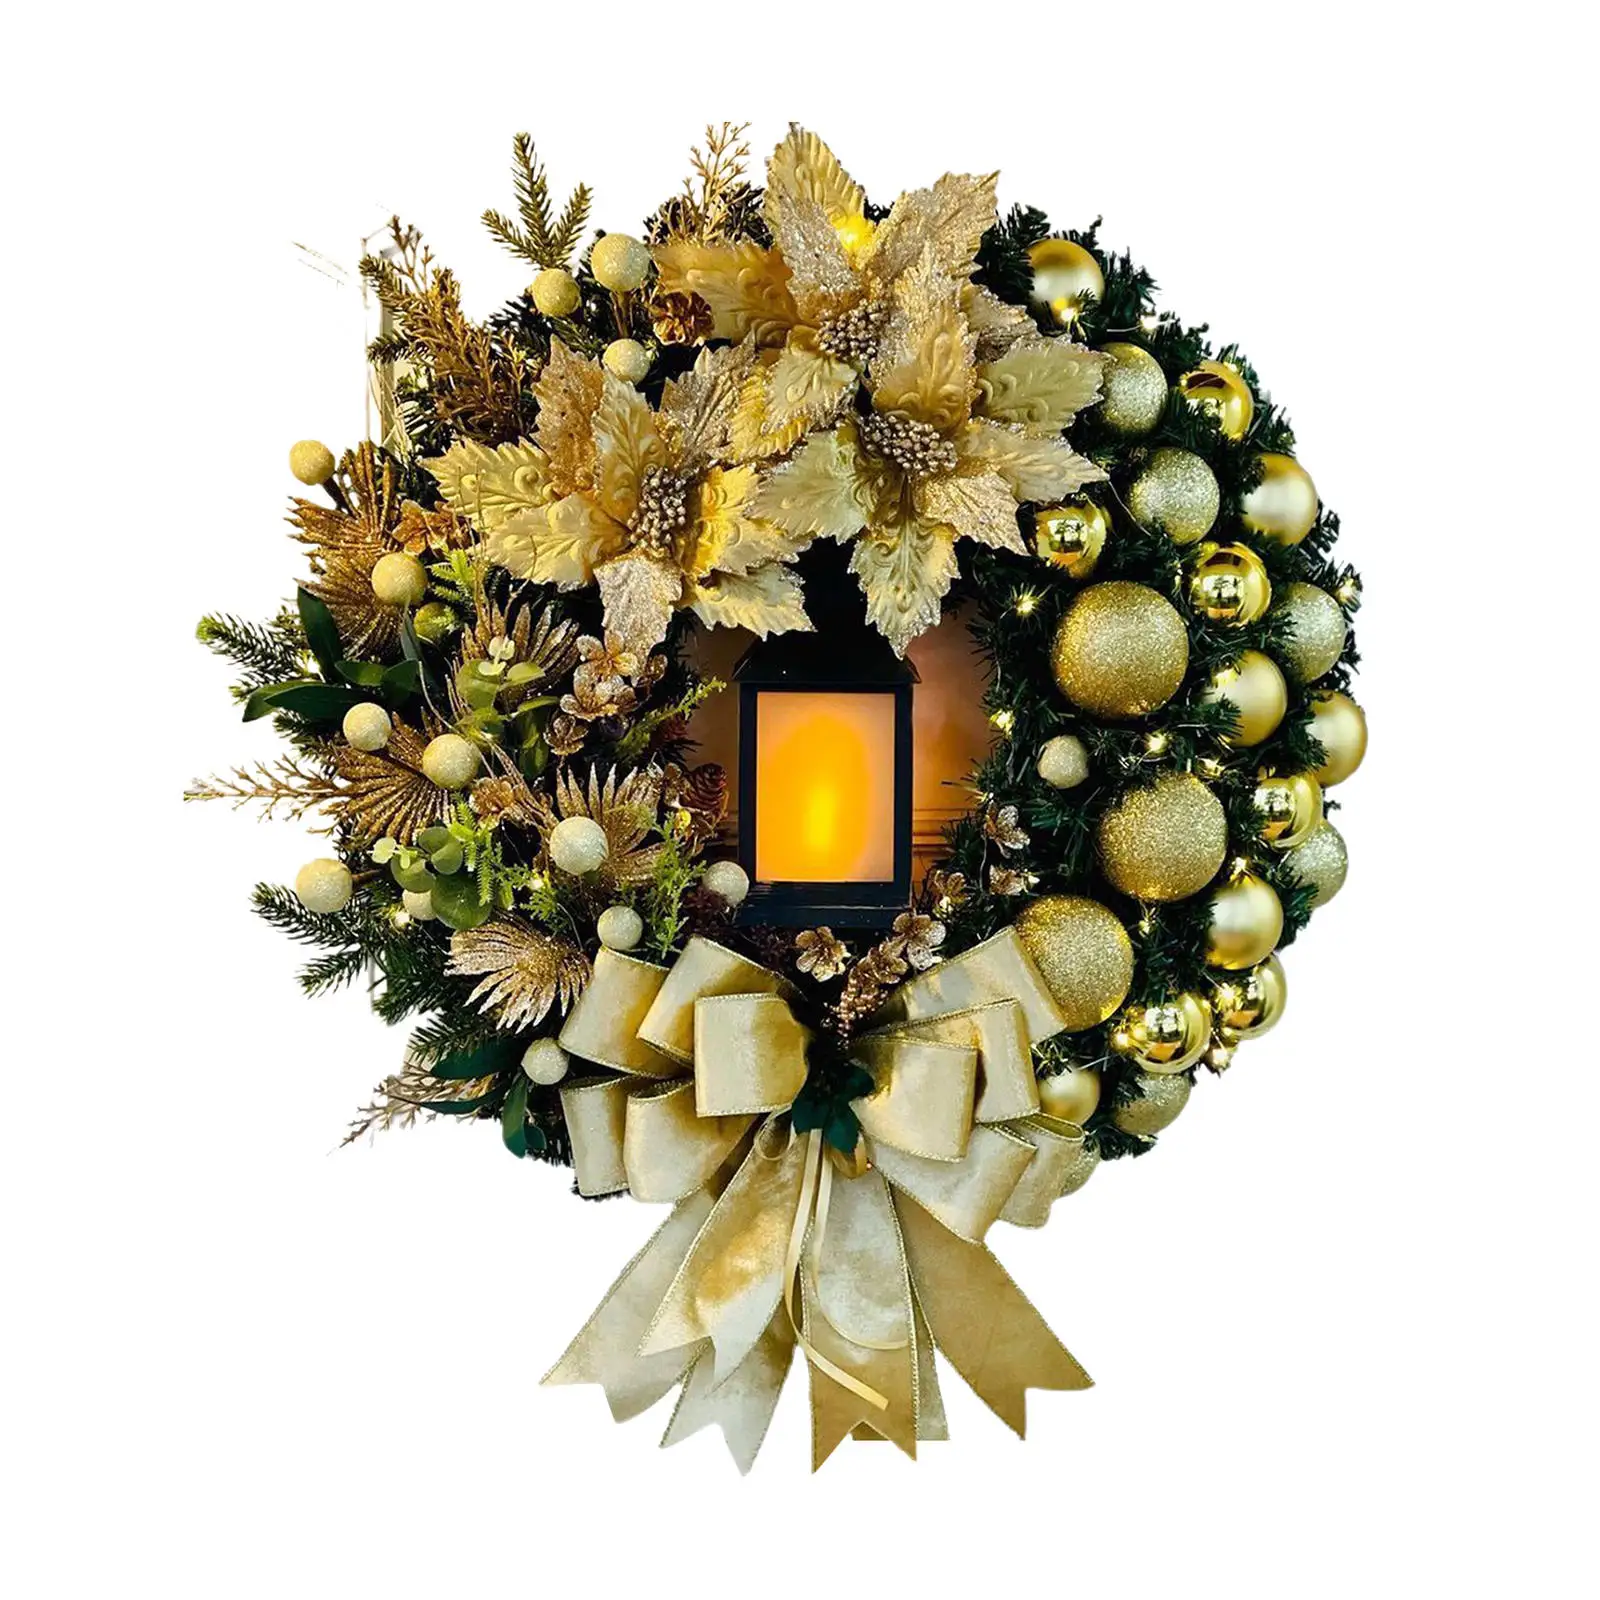 Christmas Wreath Decoration Flower Ornament with Lights Bow Sacred Gold Garland Hanging for Home Front Door Window Outdoor Xmas